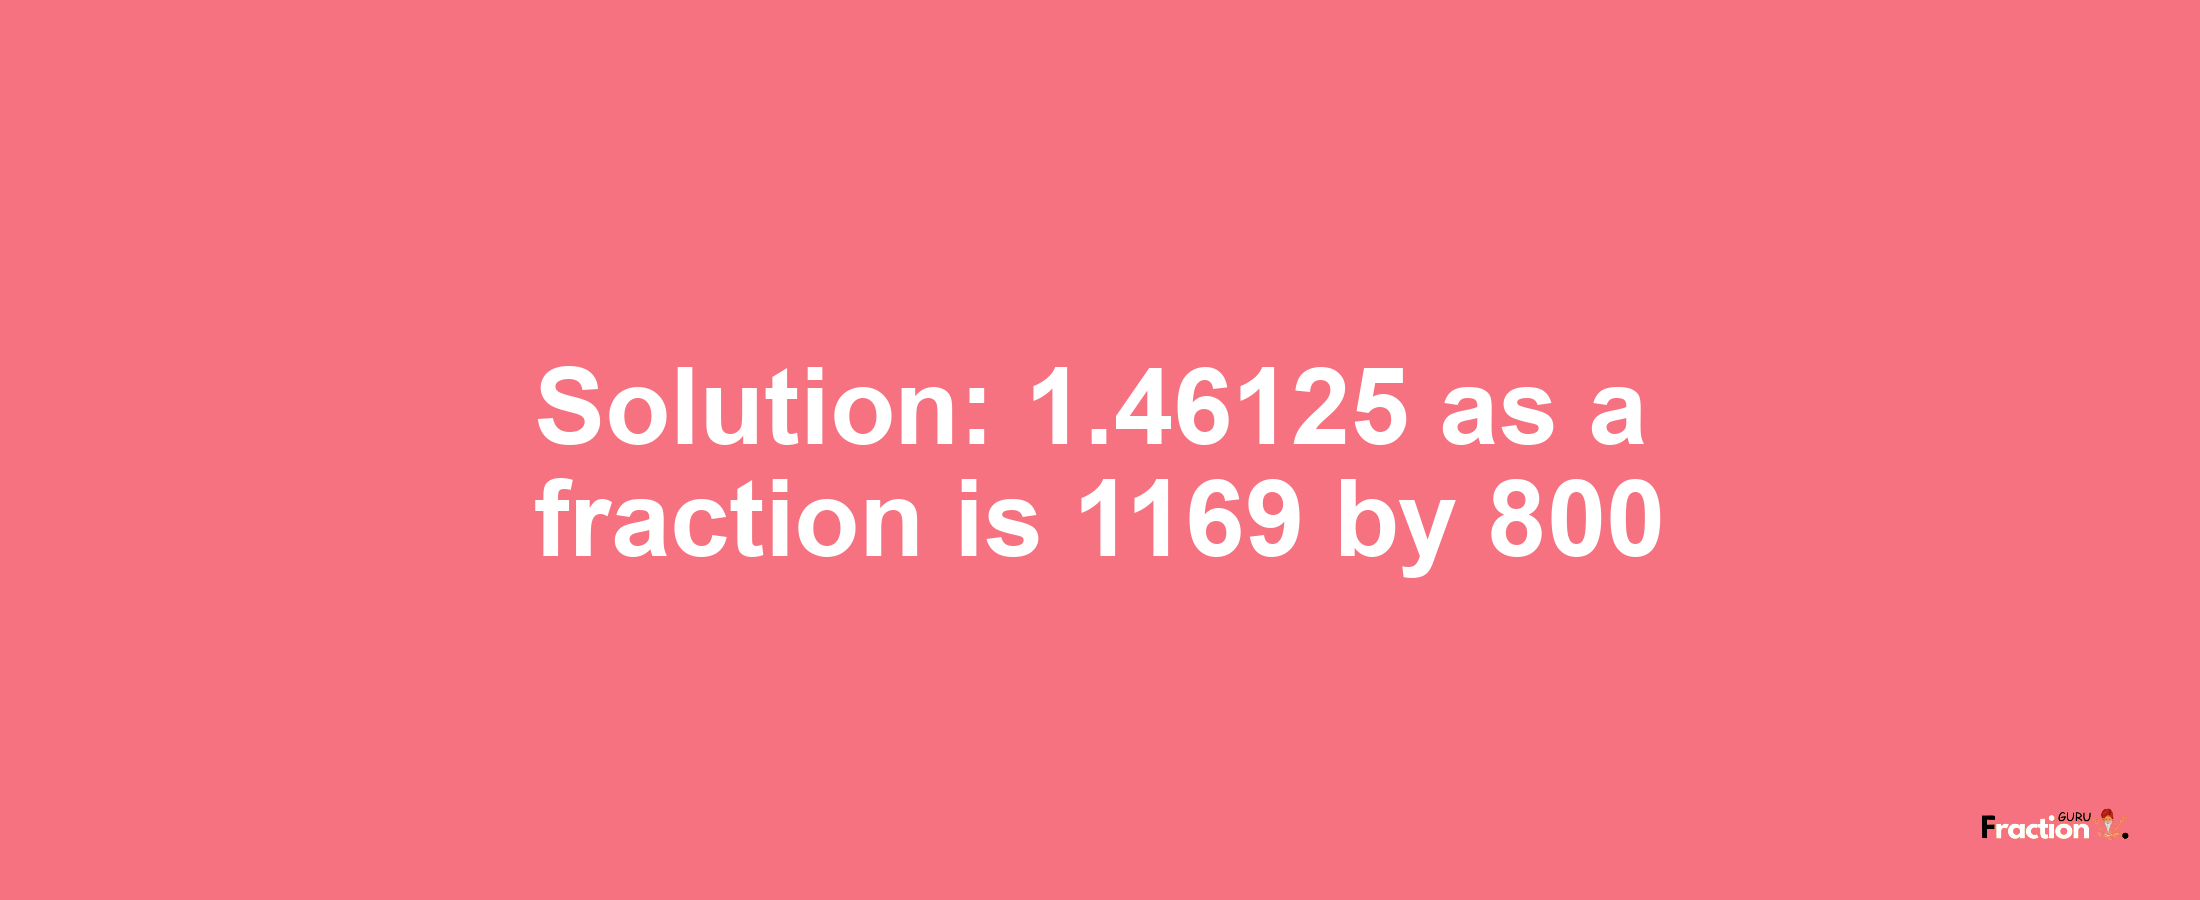 Solution:1.46125 as a fraction is 1169/800